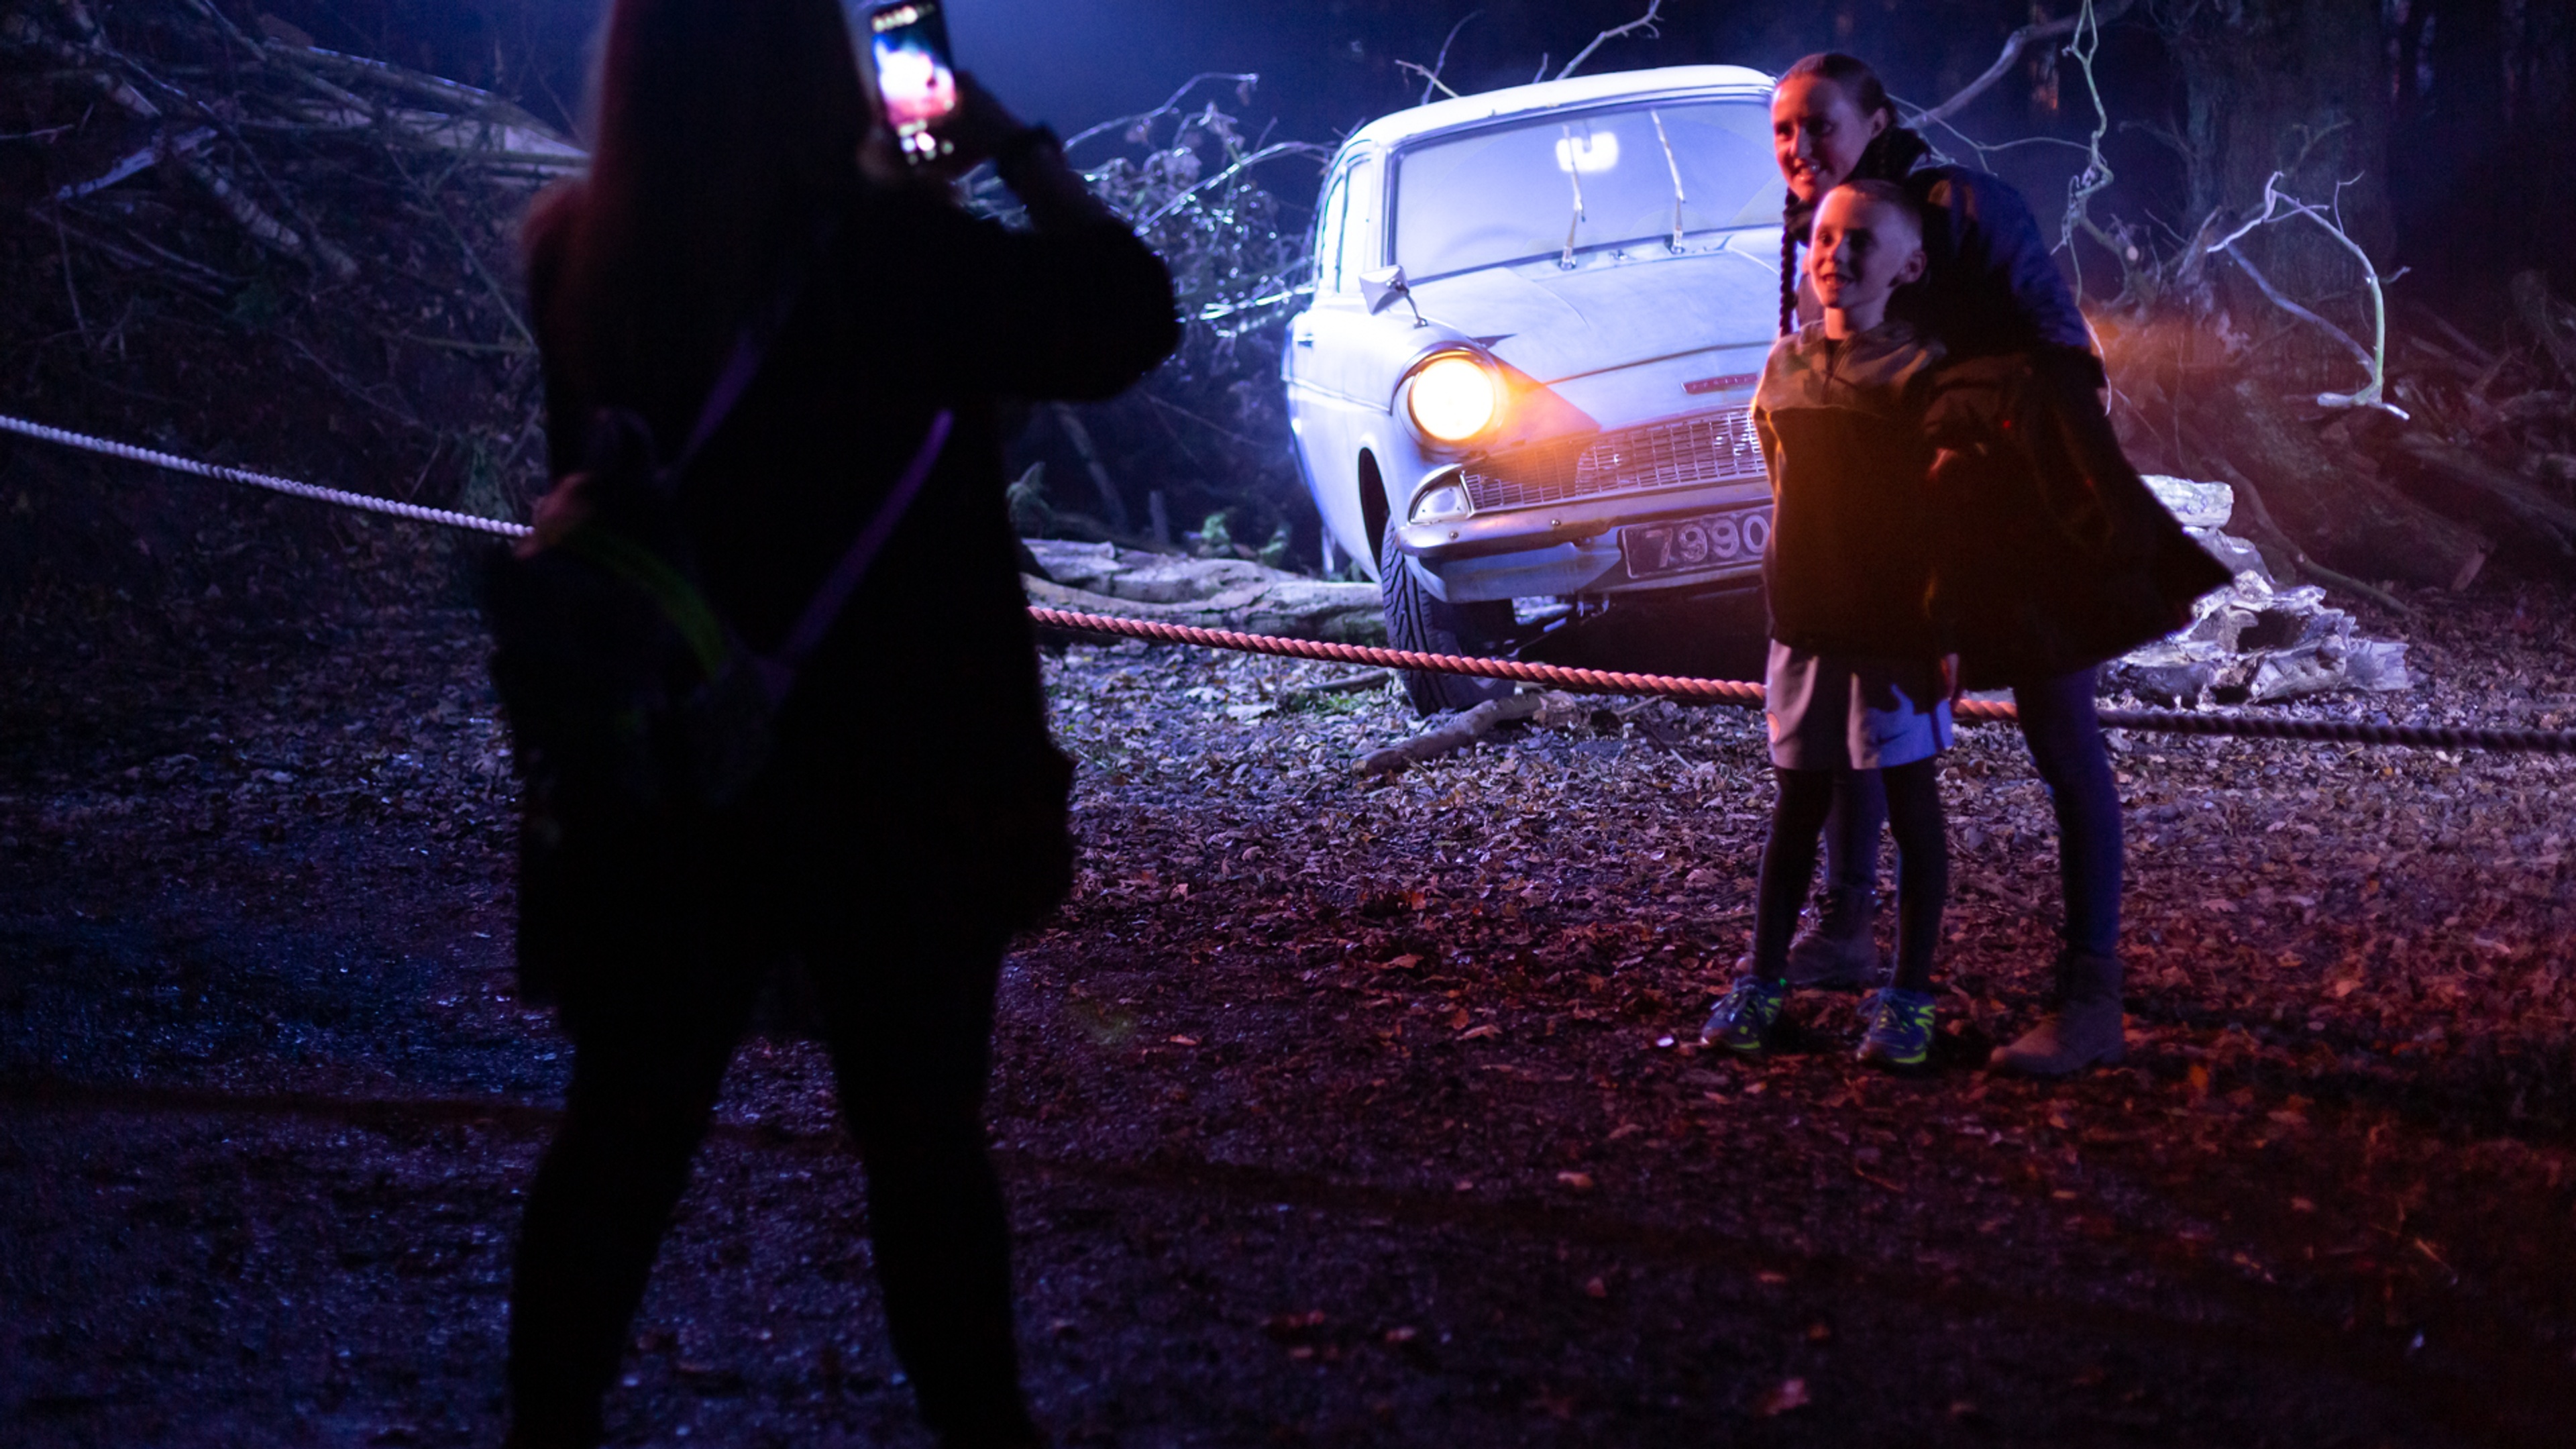 Harry Potter: A Forbidden Forest Experience Woman taking photo of a girl and teenager in front of a car with the headlights on